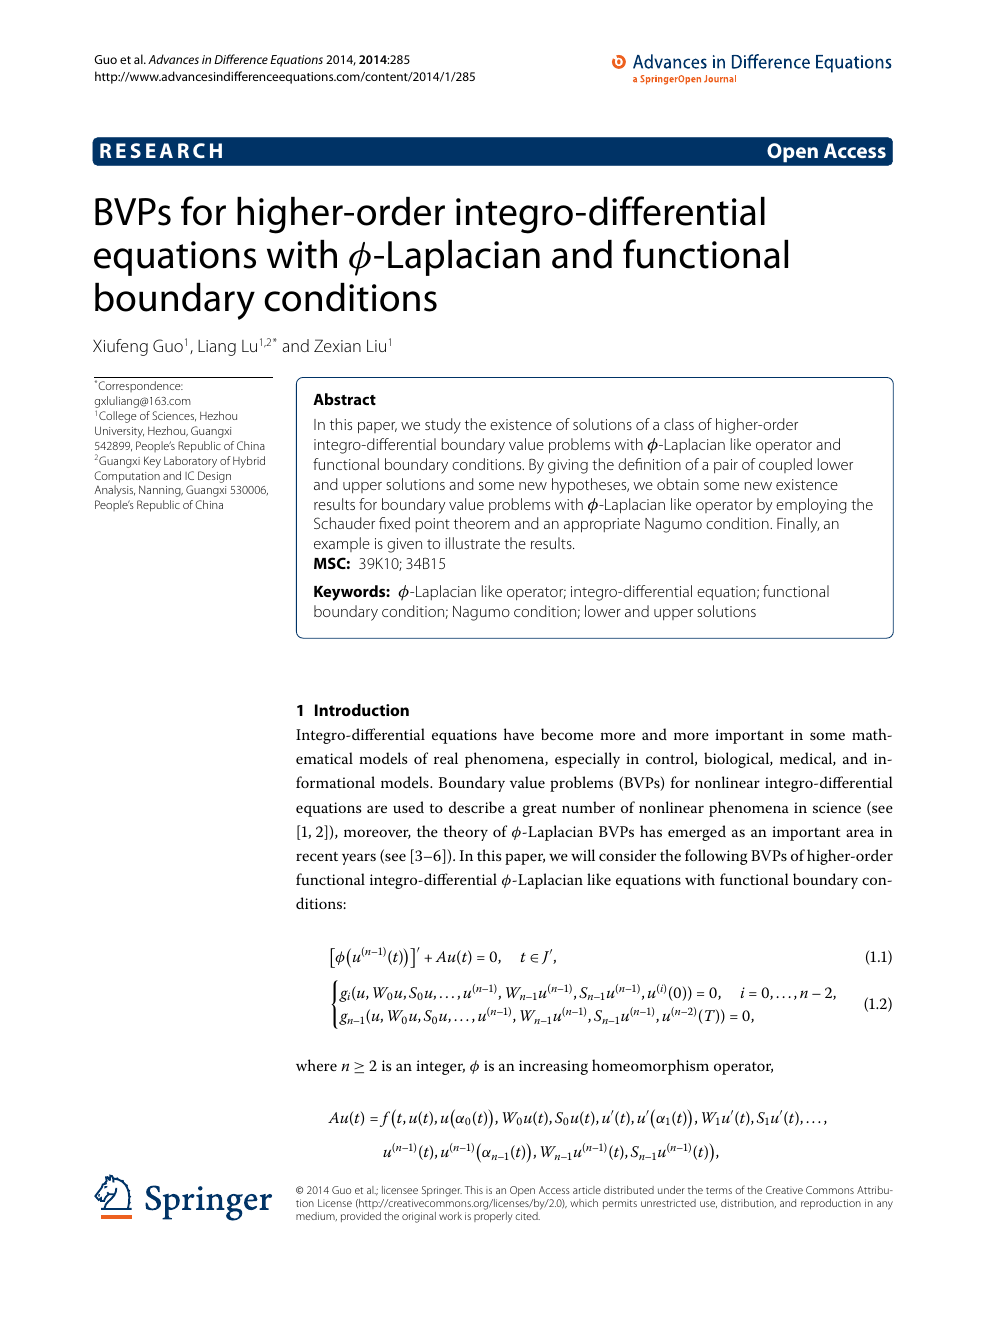 Bvps For Higher Order Integro Differential Equations With ϕ Laplacian And Functional Boundary Conditions Topic Of Research Paper In Mathematics Download Scholarly Article Pdf And Read For Free On Cyberleninka Open Science Hub